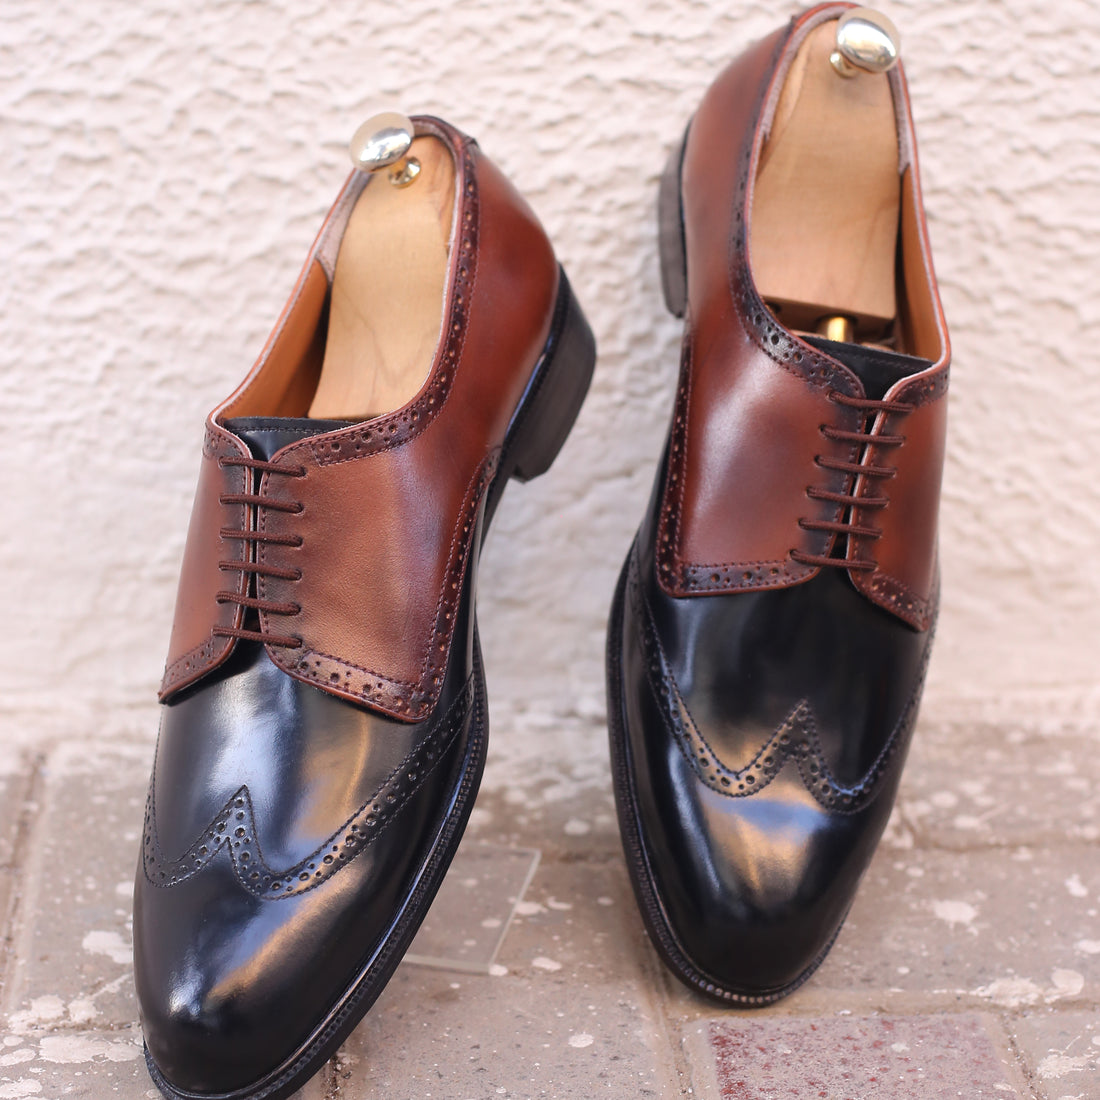 Handsome Wing Tip Oxfords Sophisticated Black/Brown Derby Shoes for Office or Evening Wear